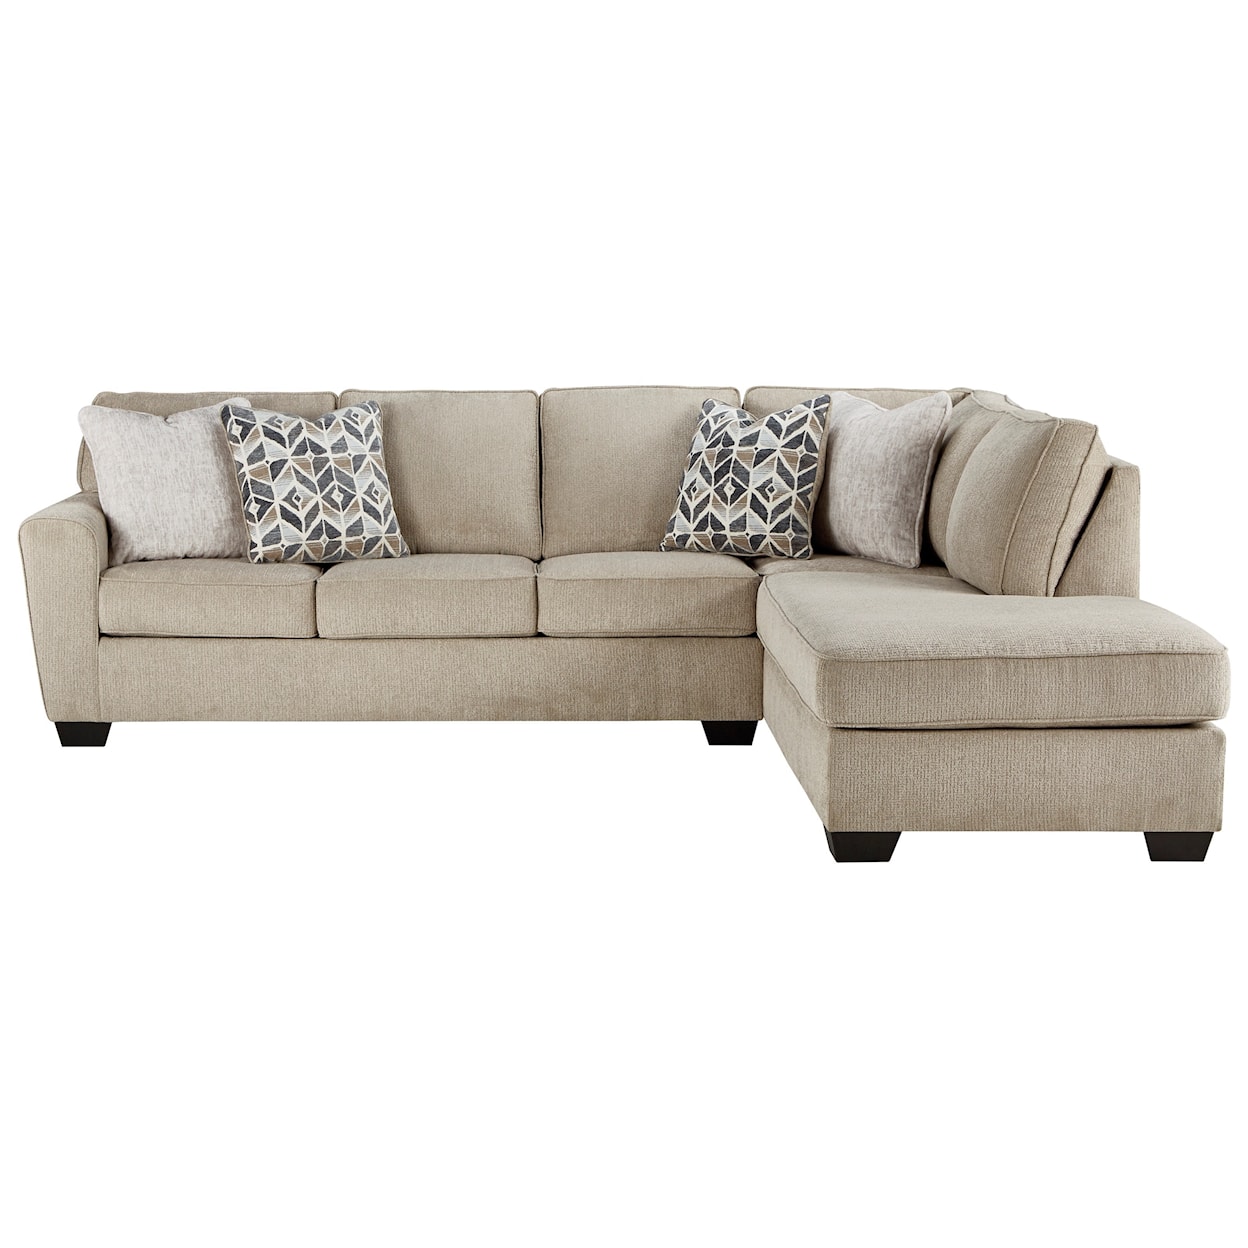 Signature Design by Ashley Furniture Decelle 2-Piece Sectional with Chaise